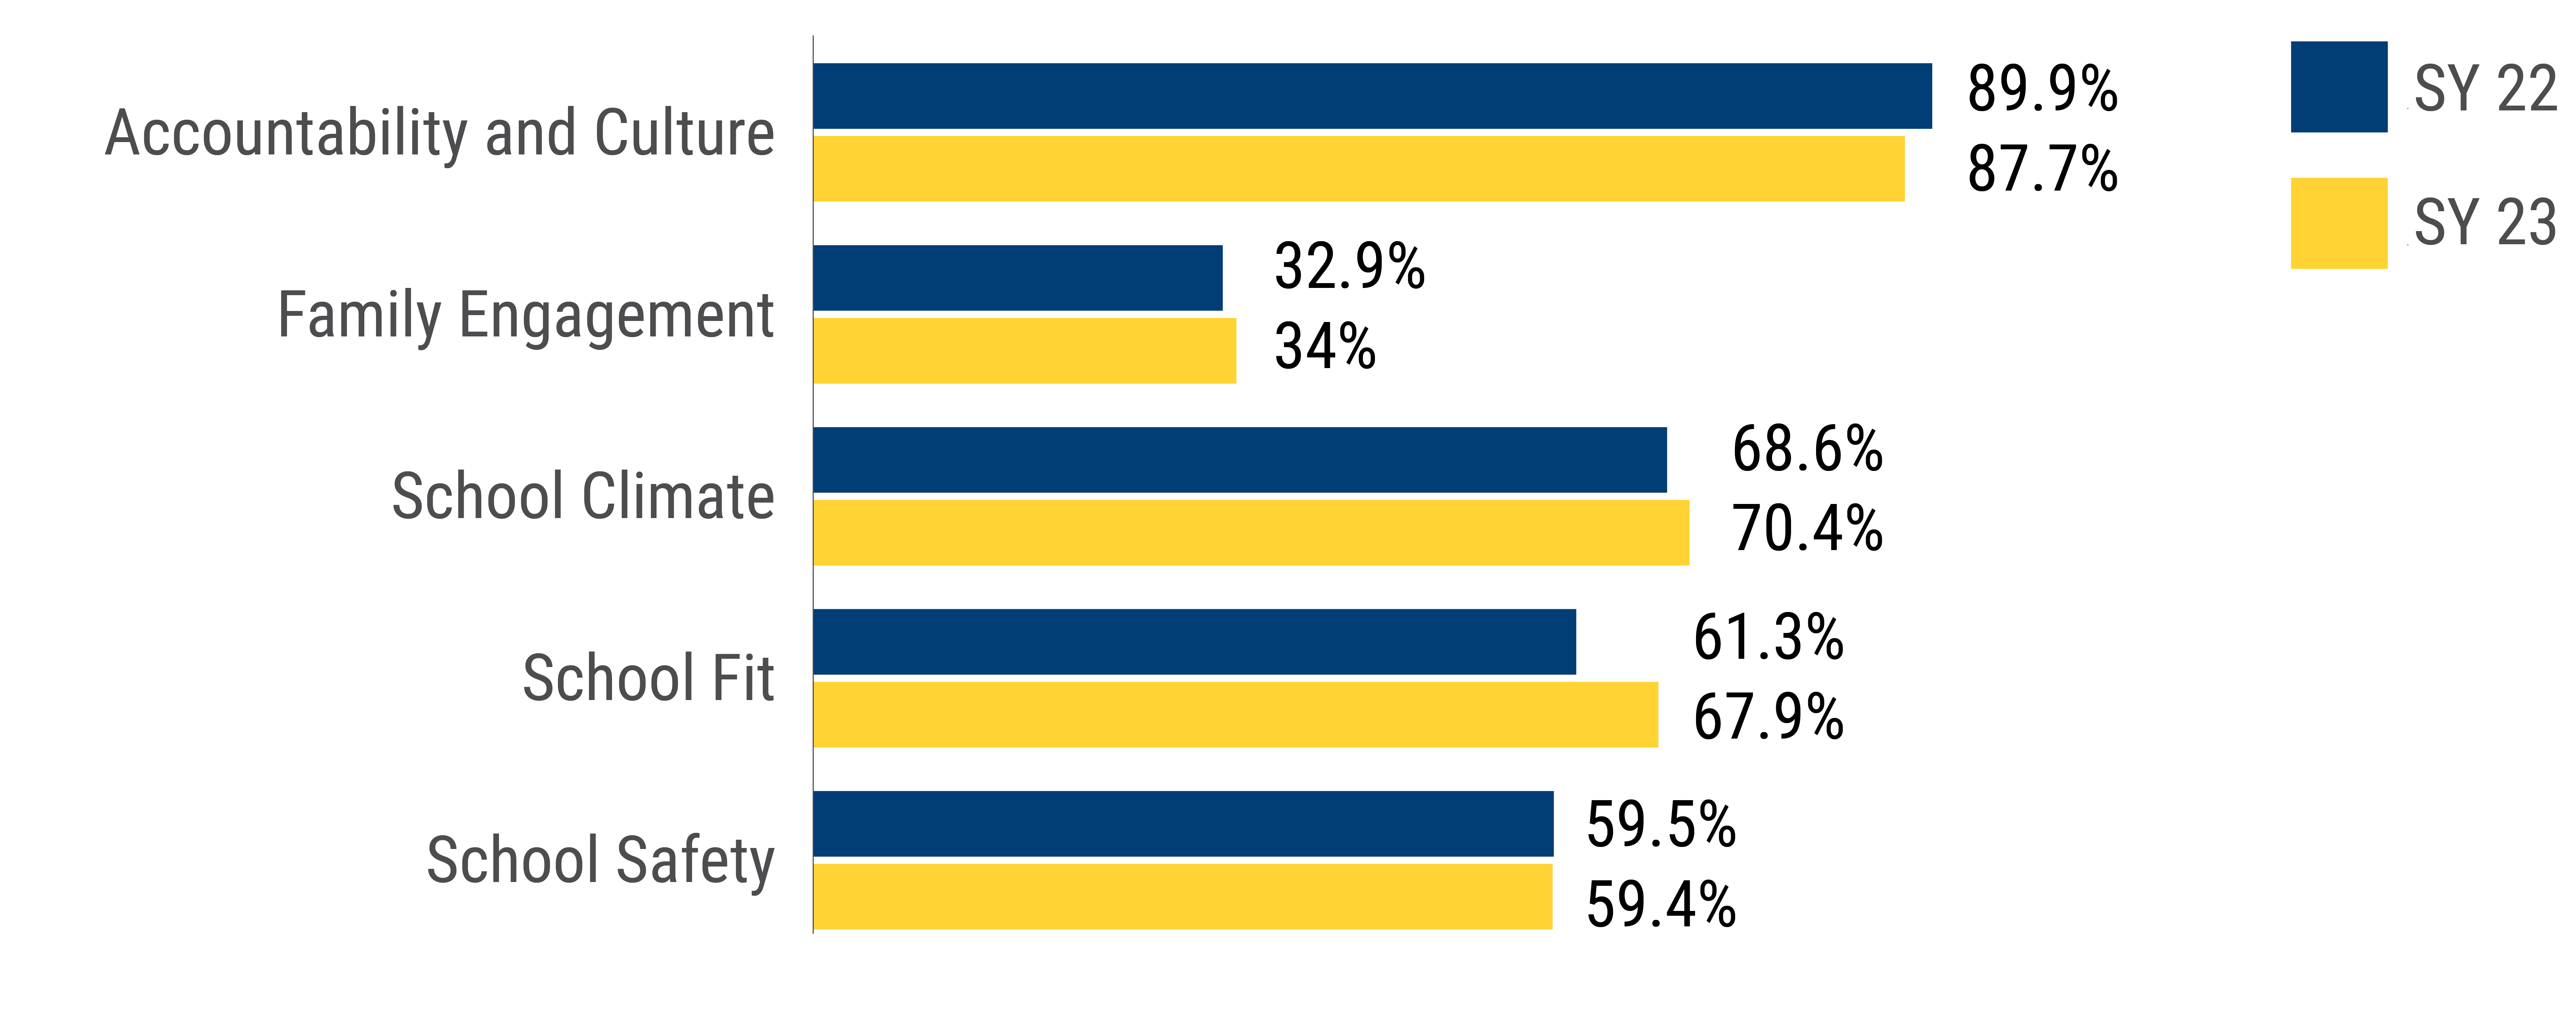 This bar graph has five different segments in it, each with two bars – a yellow bar and a blue bar sitting right on top of each other. The five segments are labeled with the five different indicators Noble Schools’ Family Experience Survey measured: Accountability and Culture, Family Engagement, School Climate, School Fit, and School Safety. The blue bar on top in each segment represents the results from last school year (the 2021-2022 school year). The yellow bar right below the blue bar represents the results from this year (the 2022-2023 school year). To the right of each bar, there is text that shows the percentage score of favorability for each measured indicator. For Accountability and Culture, the favorability score in the 21-22 school year was 89.9 percent and it was 87.7 percent for the 22-23 school year. For Family Engagement, the favorability score in the 21-22 school year was 32.9 percent and it was 34 percent for the 22-23 school year. For School Climate, the favorability score in the 21-22 school year was 68.6 percent and it was 70.4 percent for the 22-23 school year. For School Fit, the favorability score in the 21-22 school year was 61.3 percent and it was 67.9 percent for the 22-23 school year. For School Safety, the favorability score in the 21-22 school year was 59.5 percent and it was 59.4 percent for the 22-23 school year.